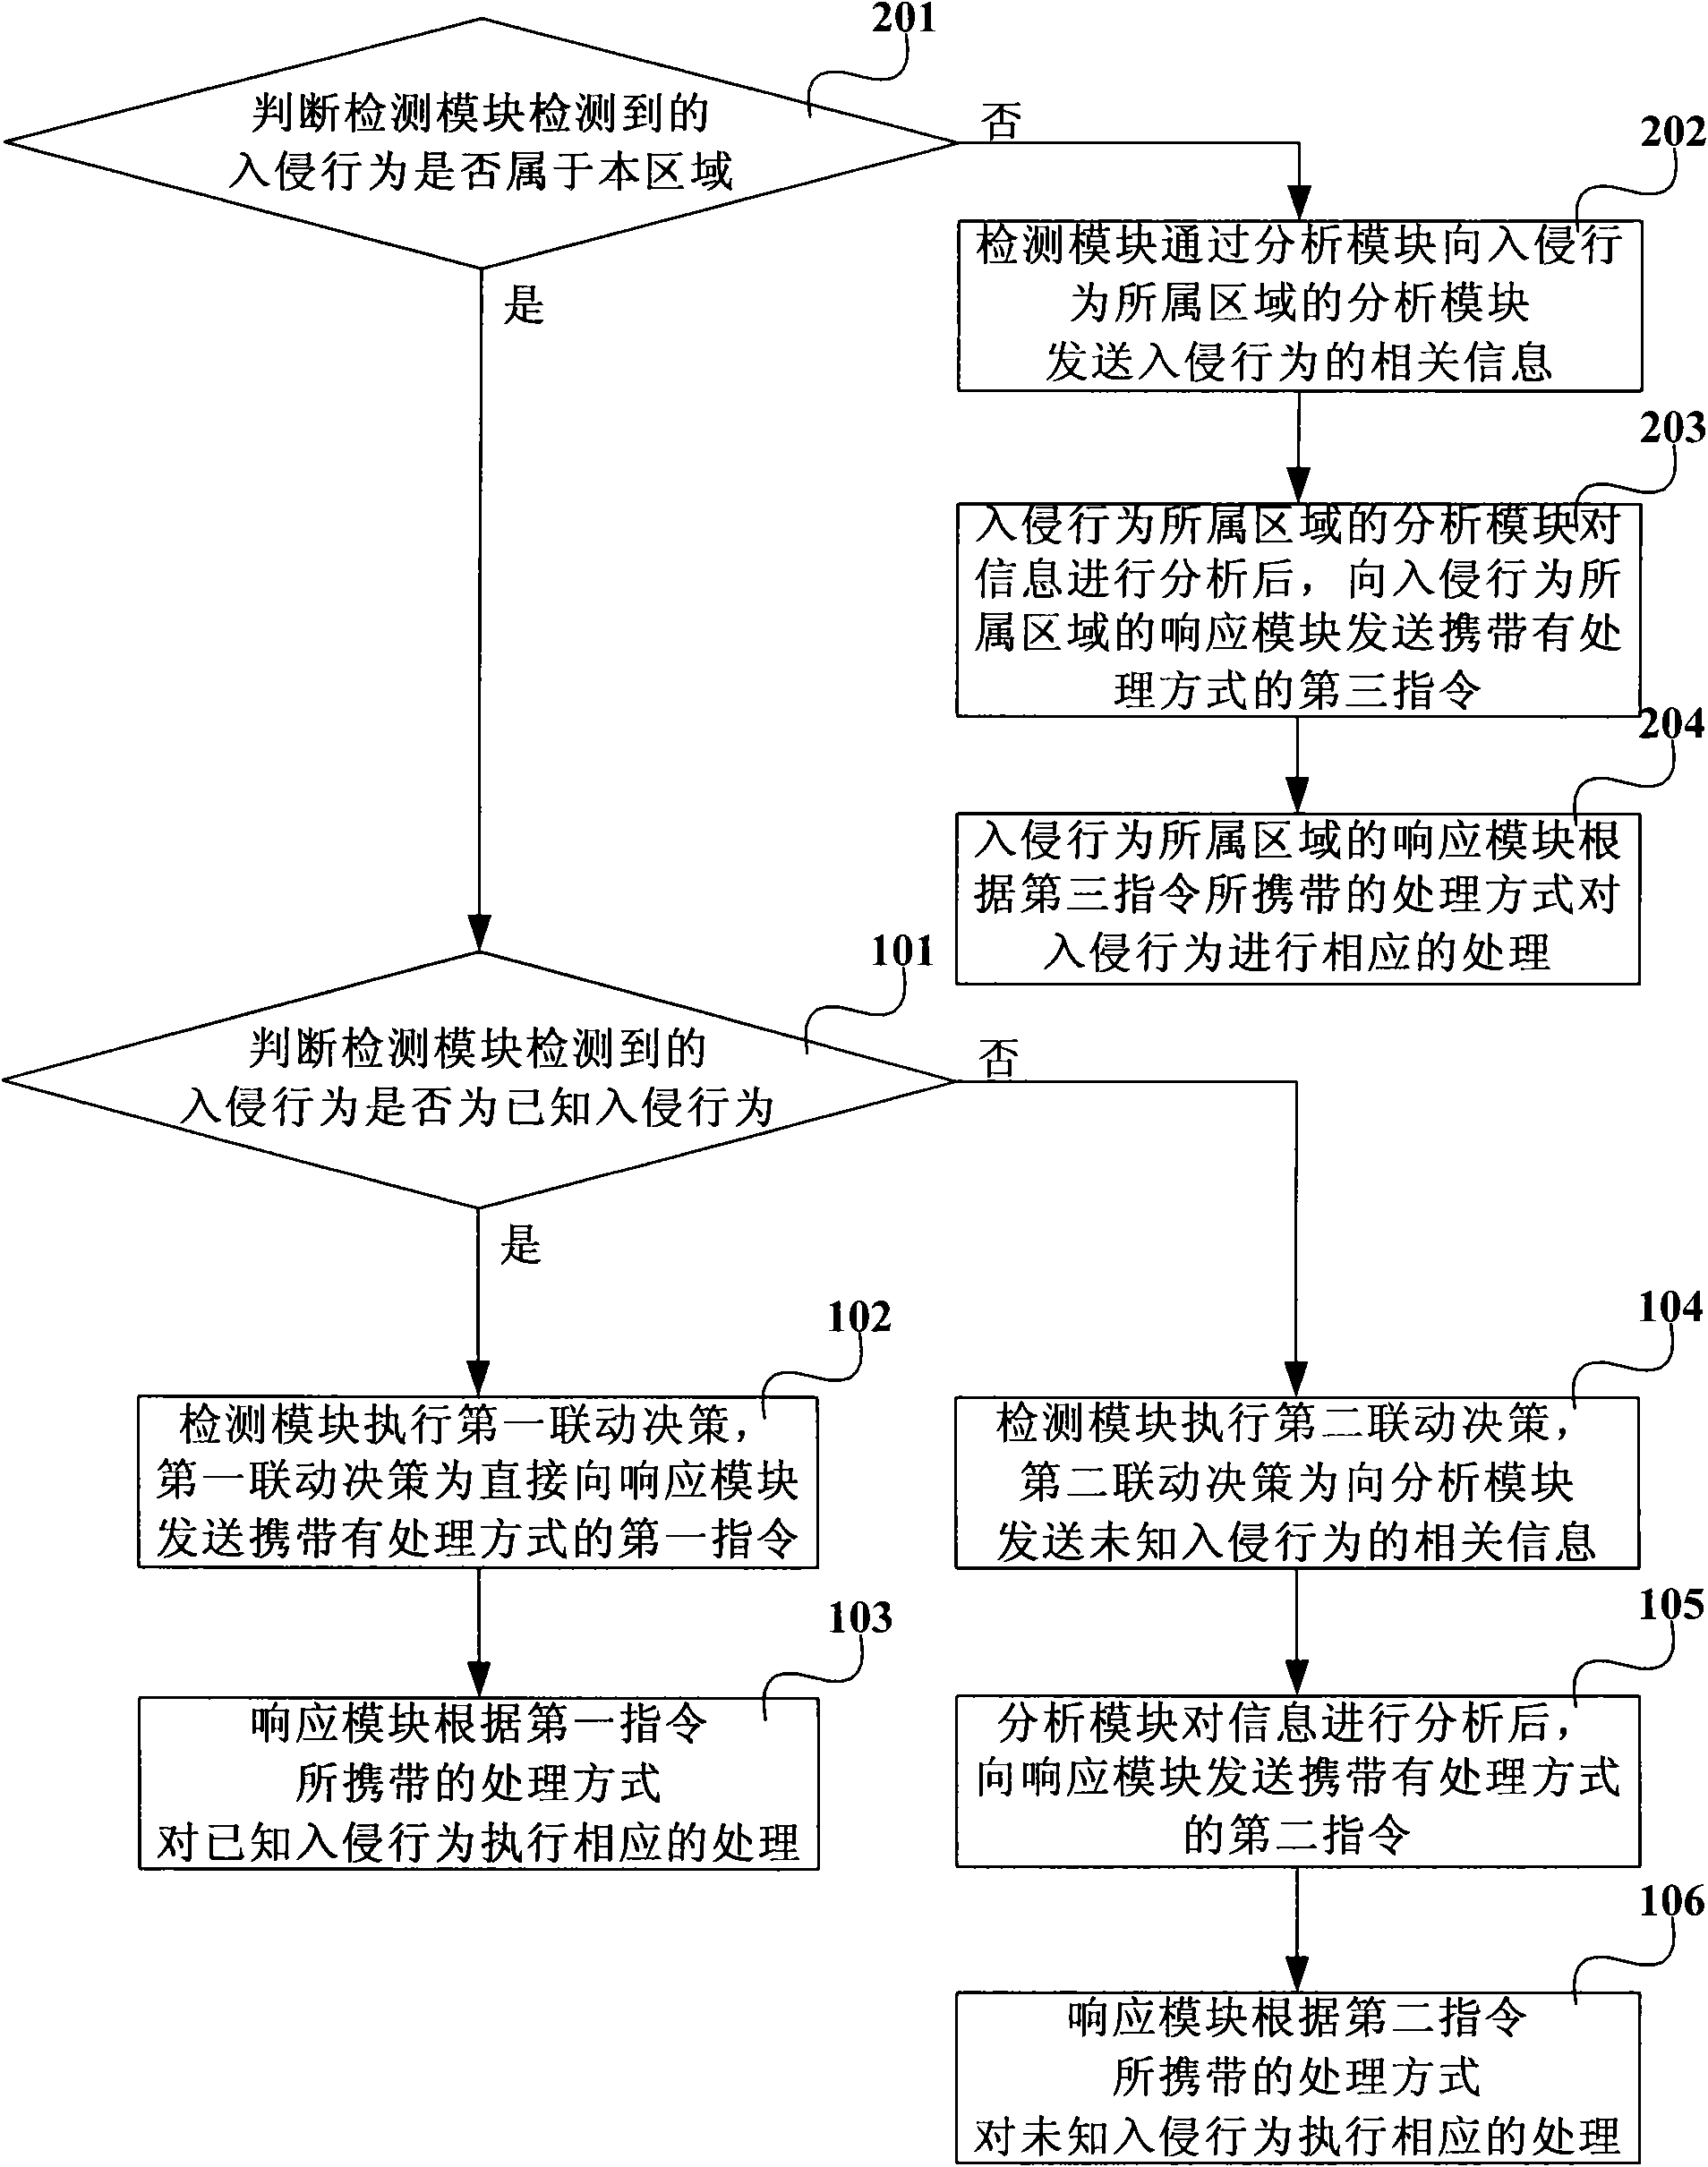 Method, system and detecting device for network security interaction